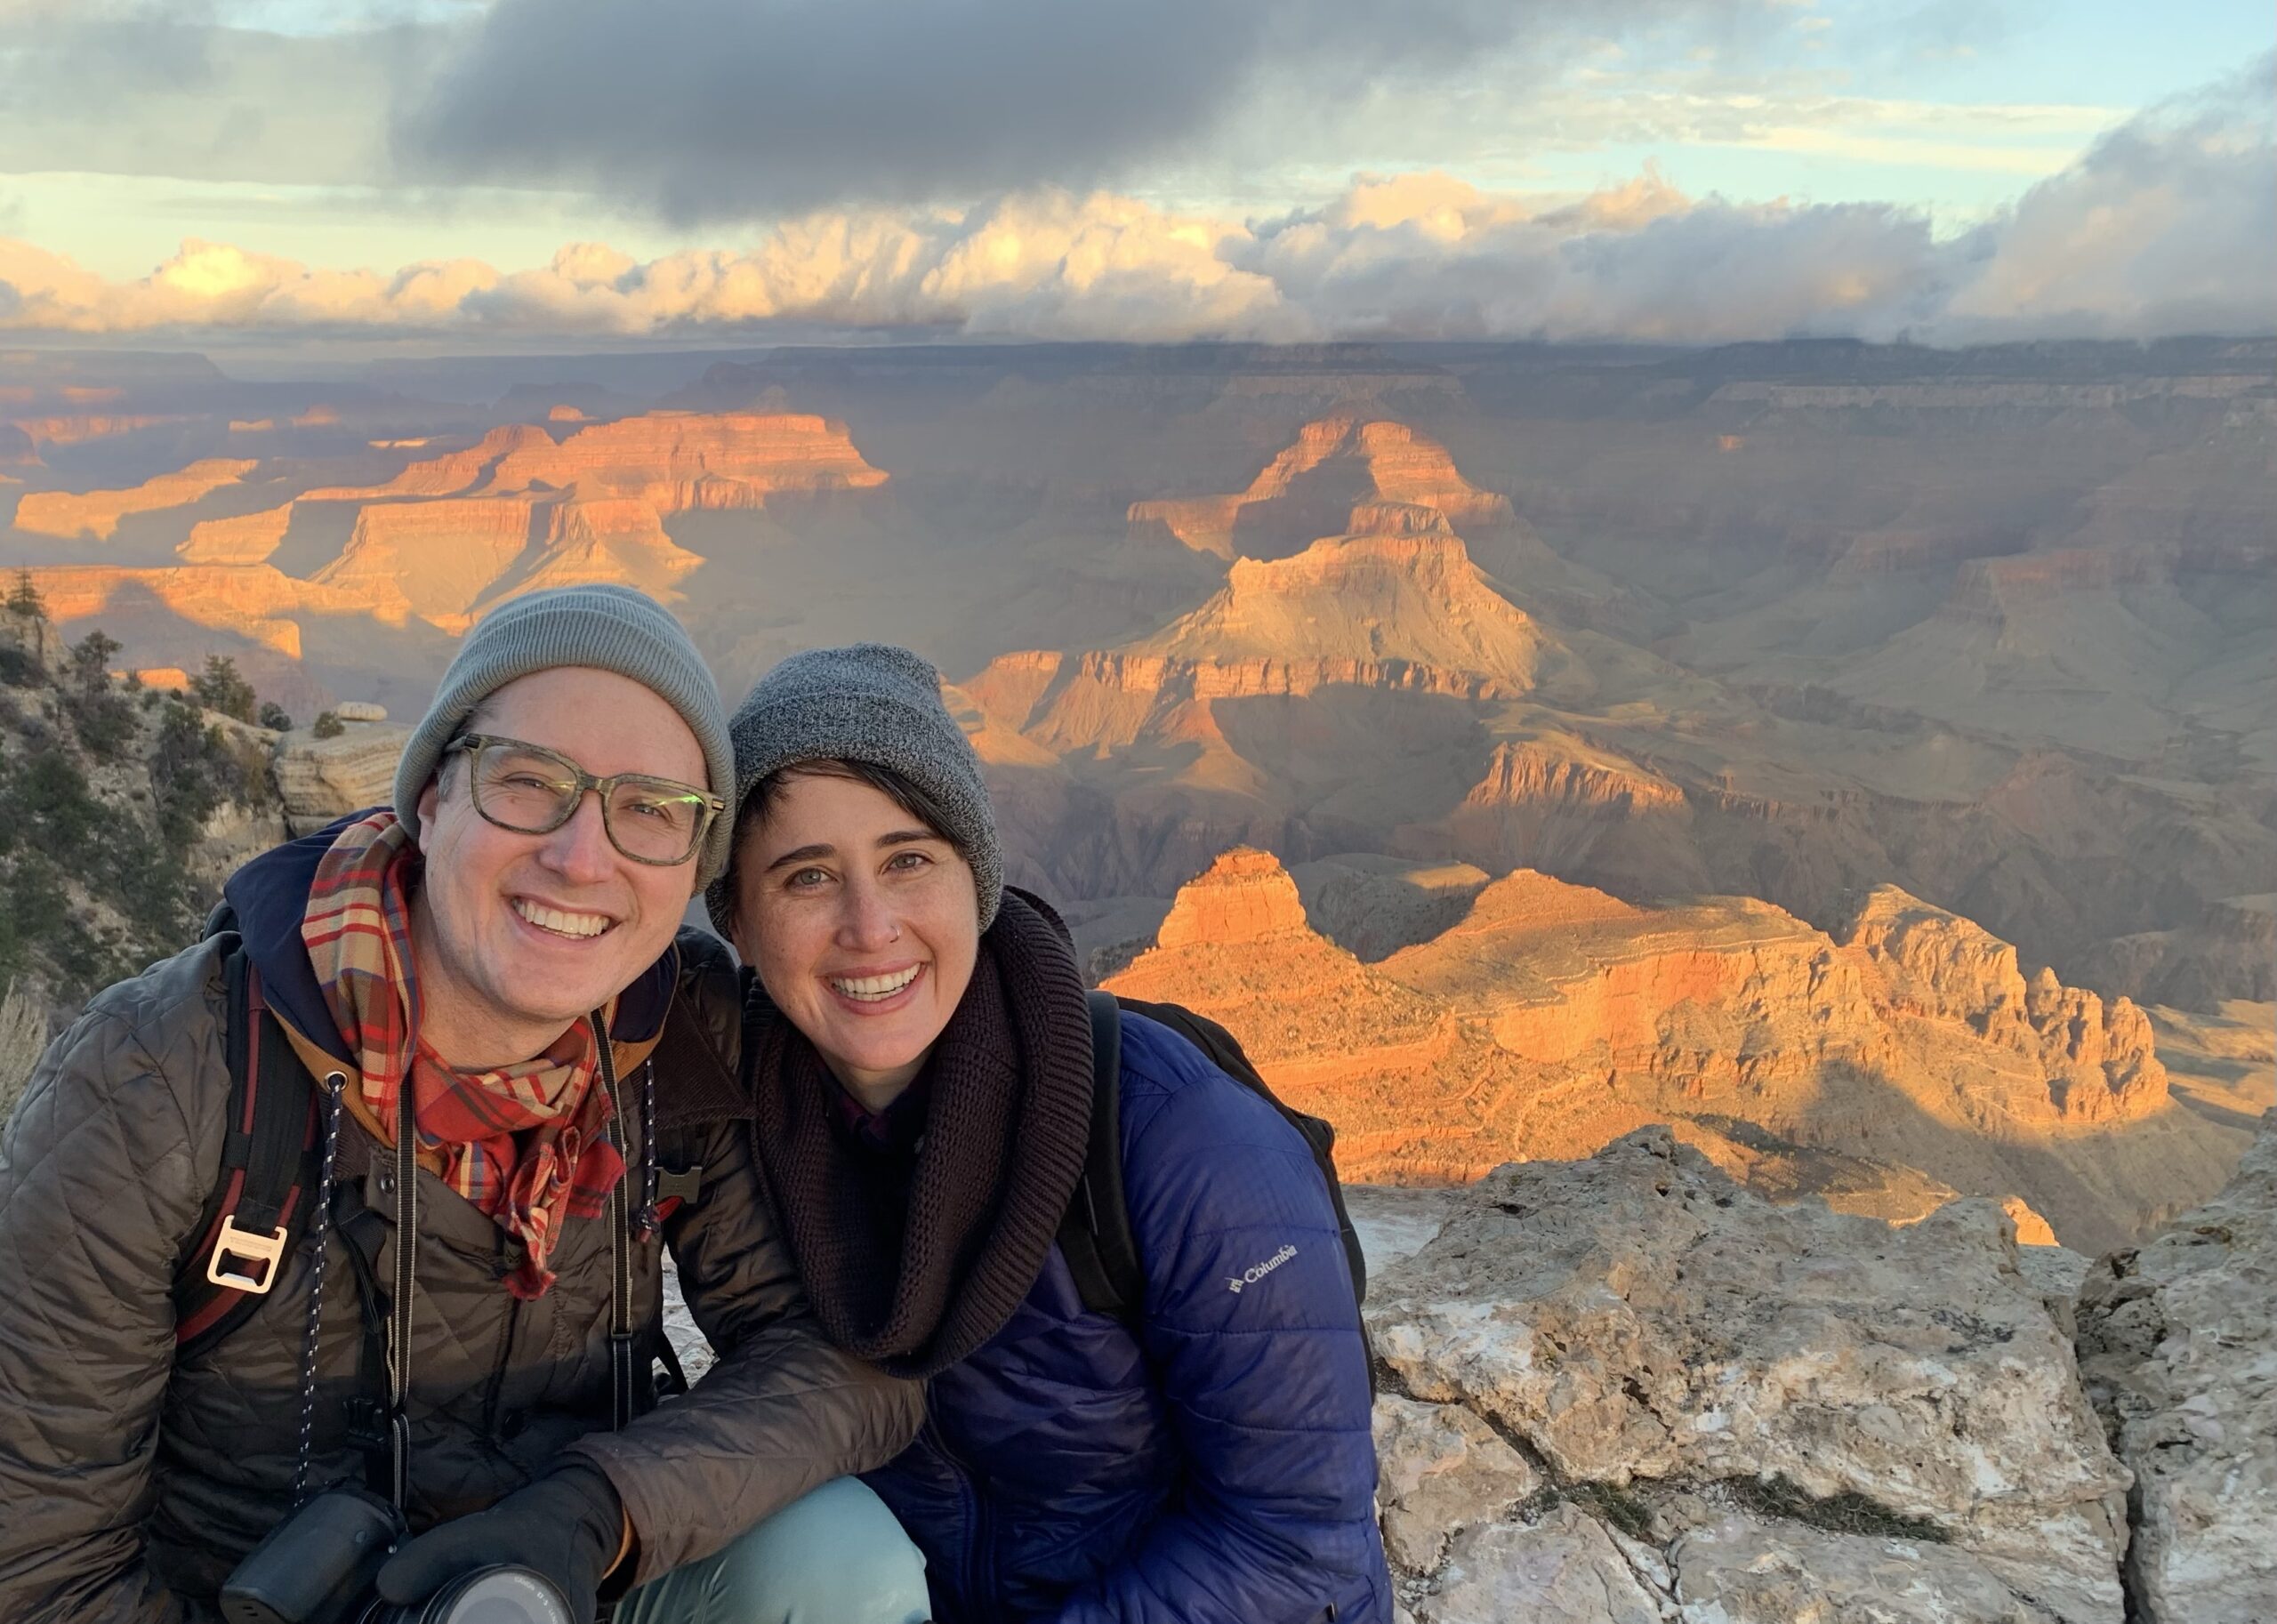 Brendan on the left, Kat in the middle, Grand Canyon sunrise on the right.